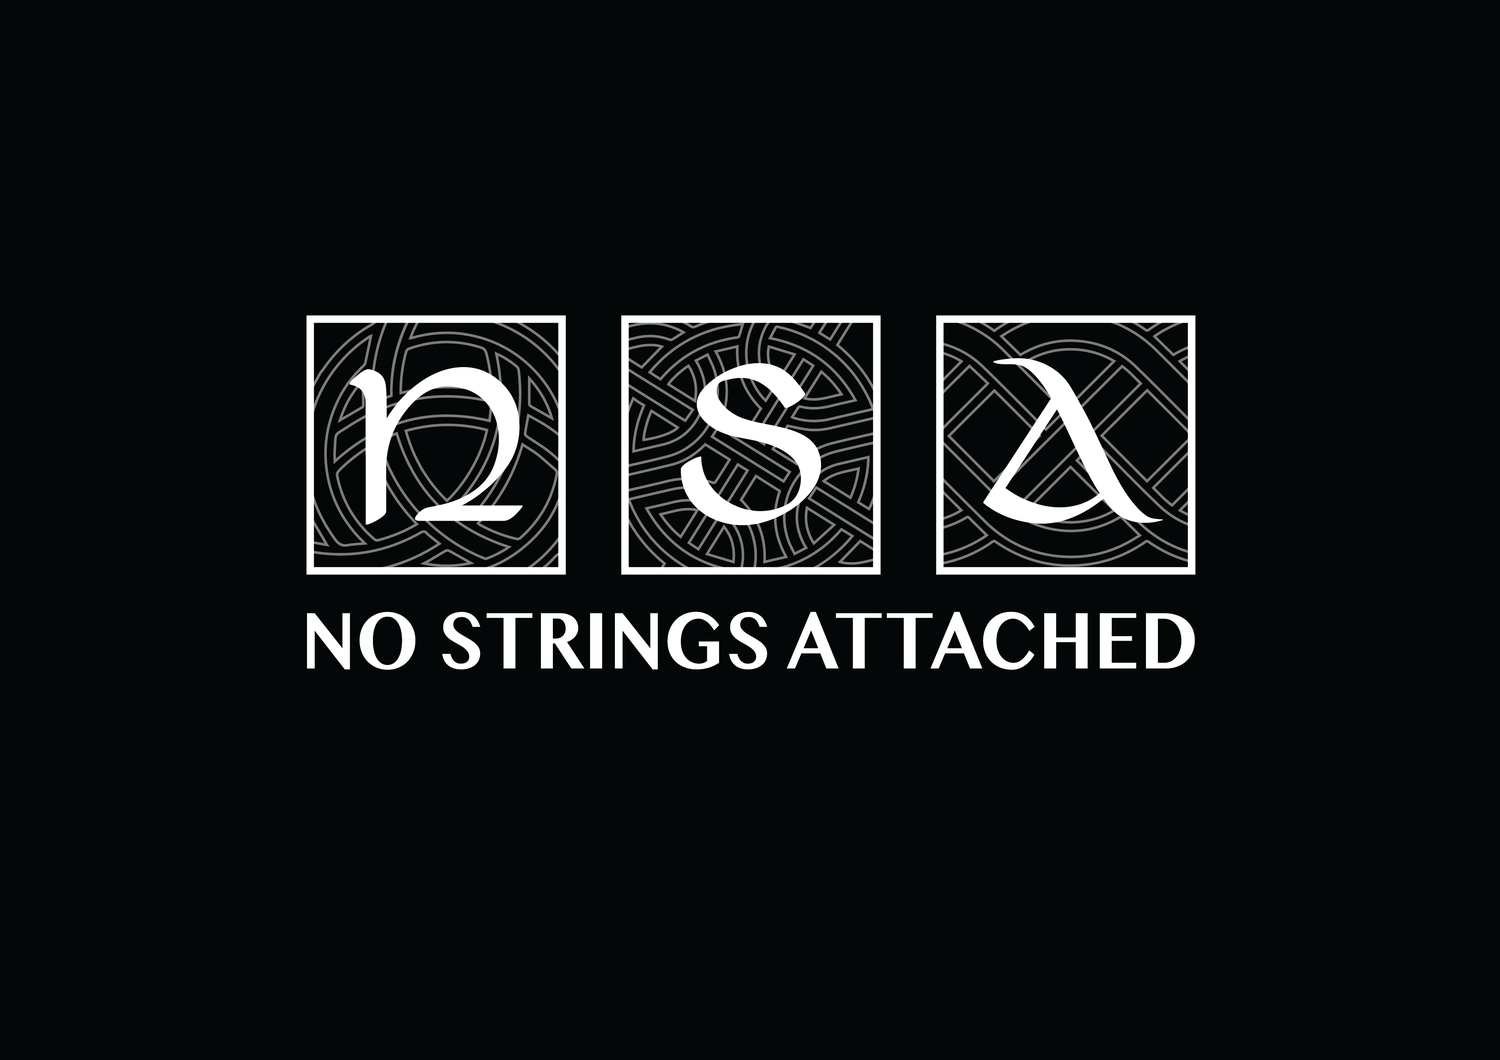 No Strings Attached Wedding Band Strings attached — noun unstated or downplayed catches, limitations, caveats, restrictions, or strings attached — obligations, restraining conditions he was able to borrow the money for the. www nsatrad com